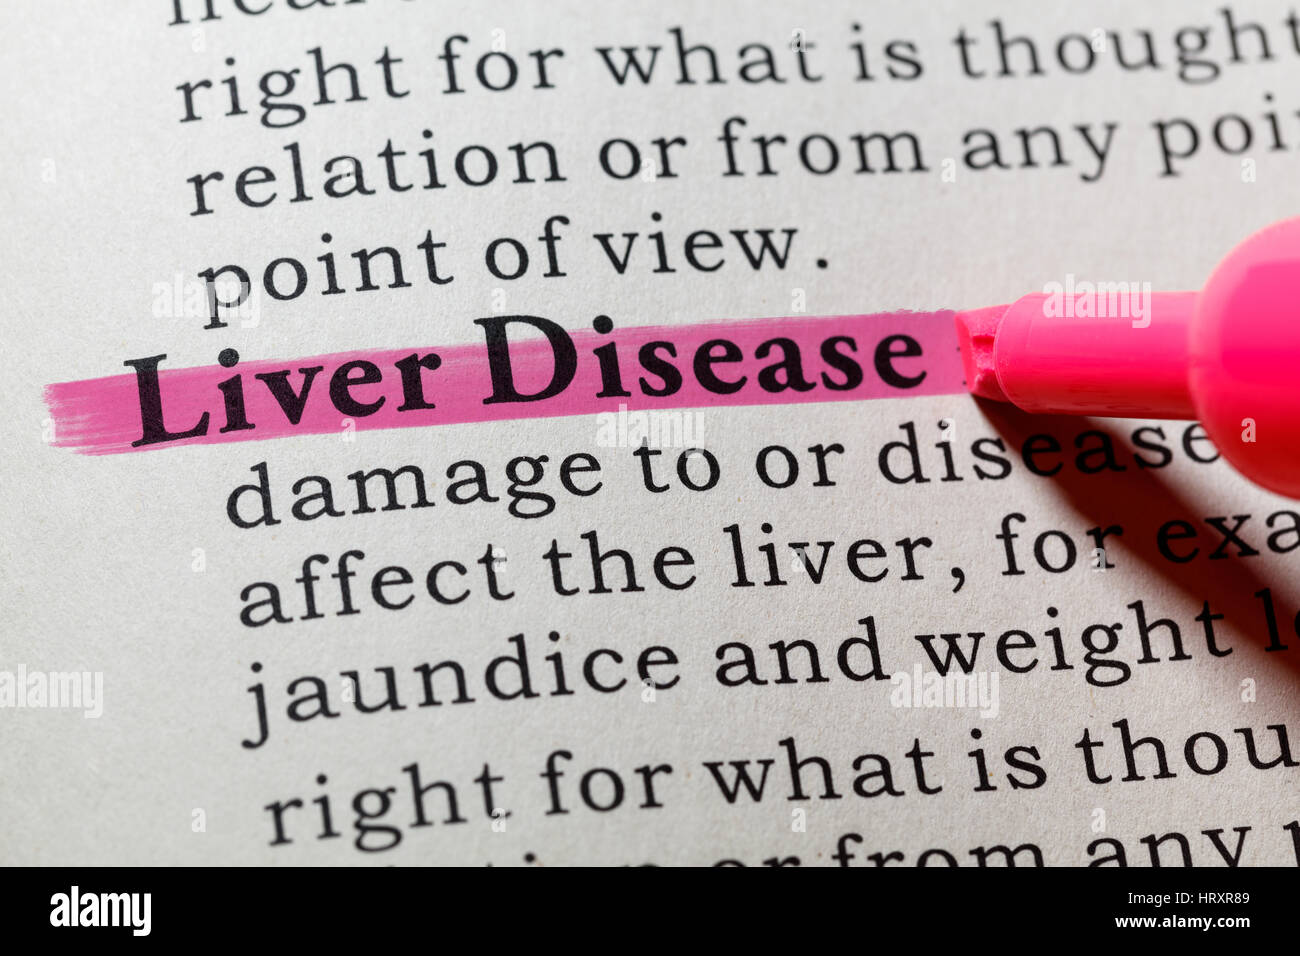 Fake Dictionary, Dictionary definition of the word liver disease. including key descriptive words. Stock Photo